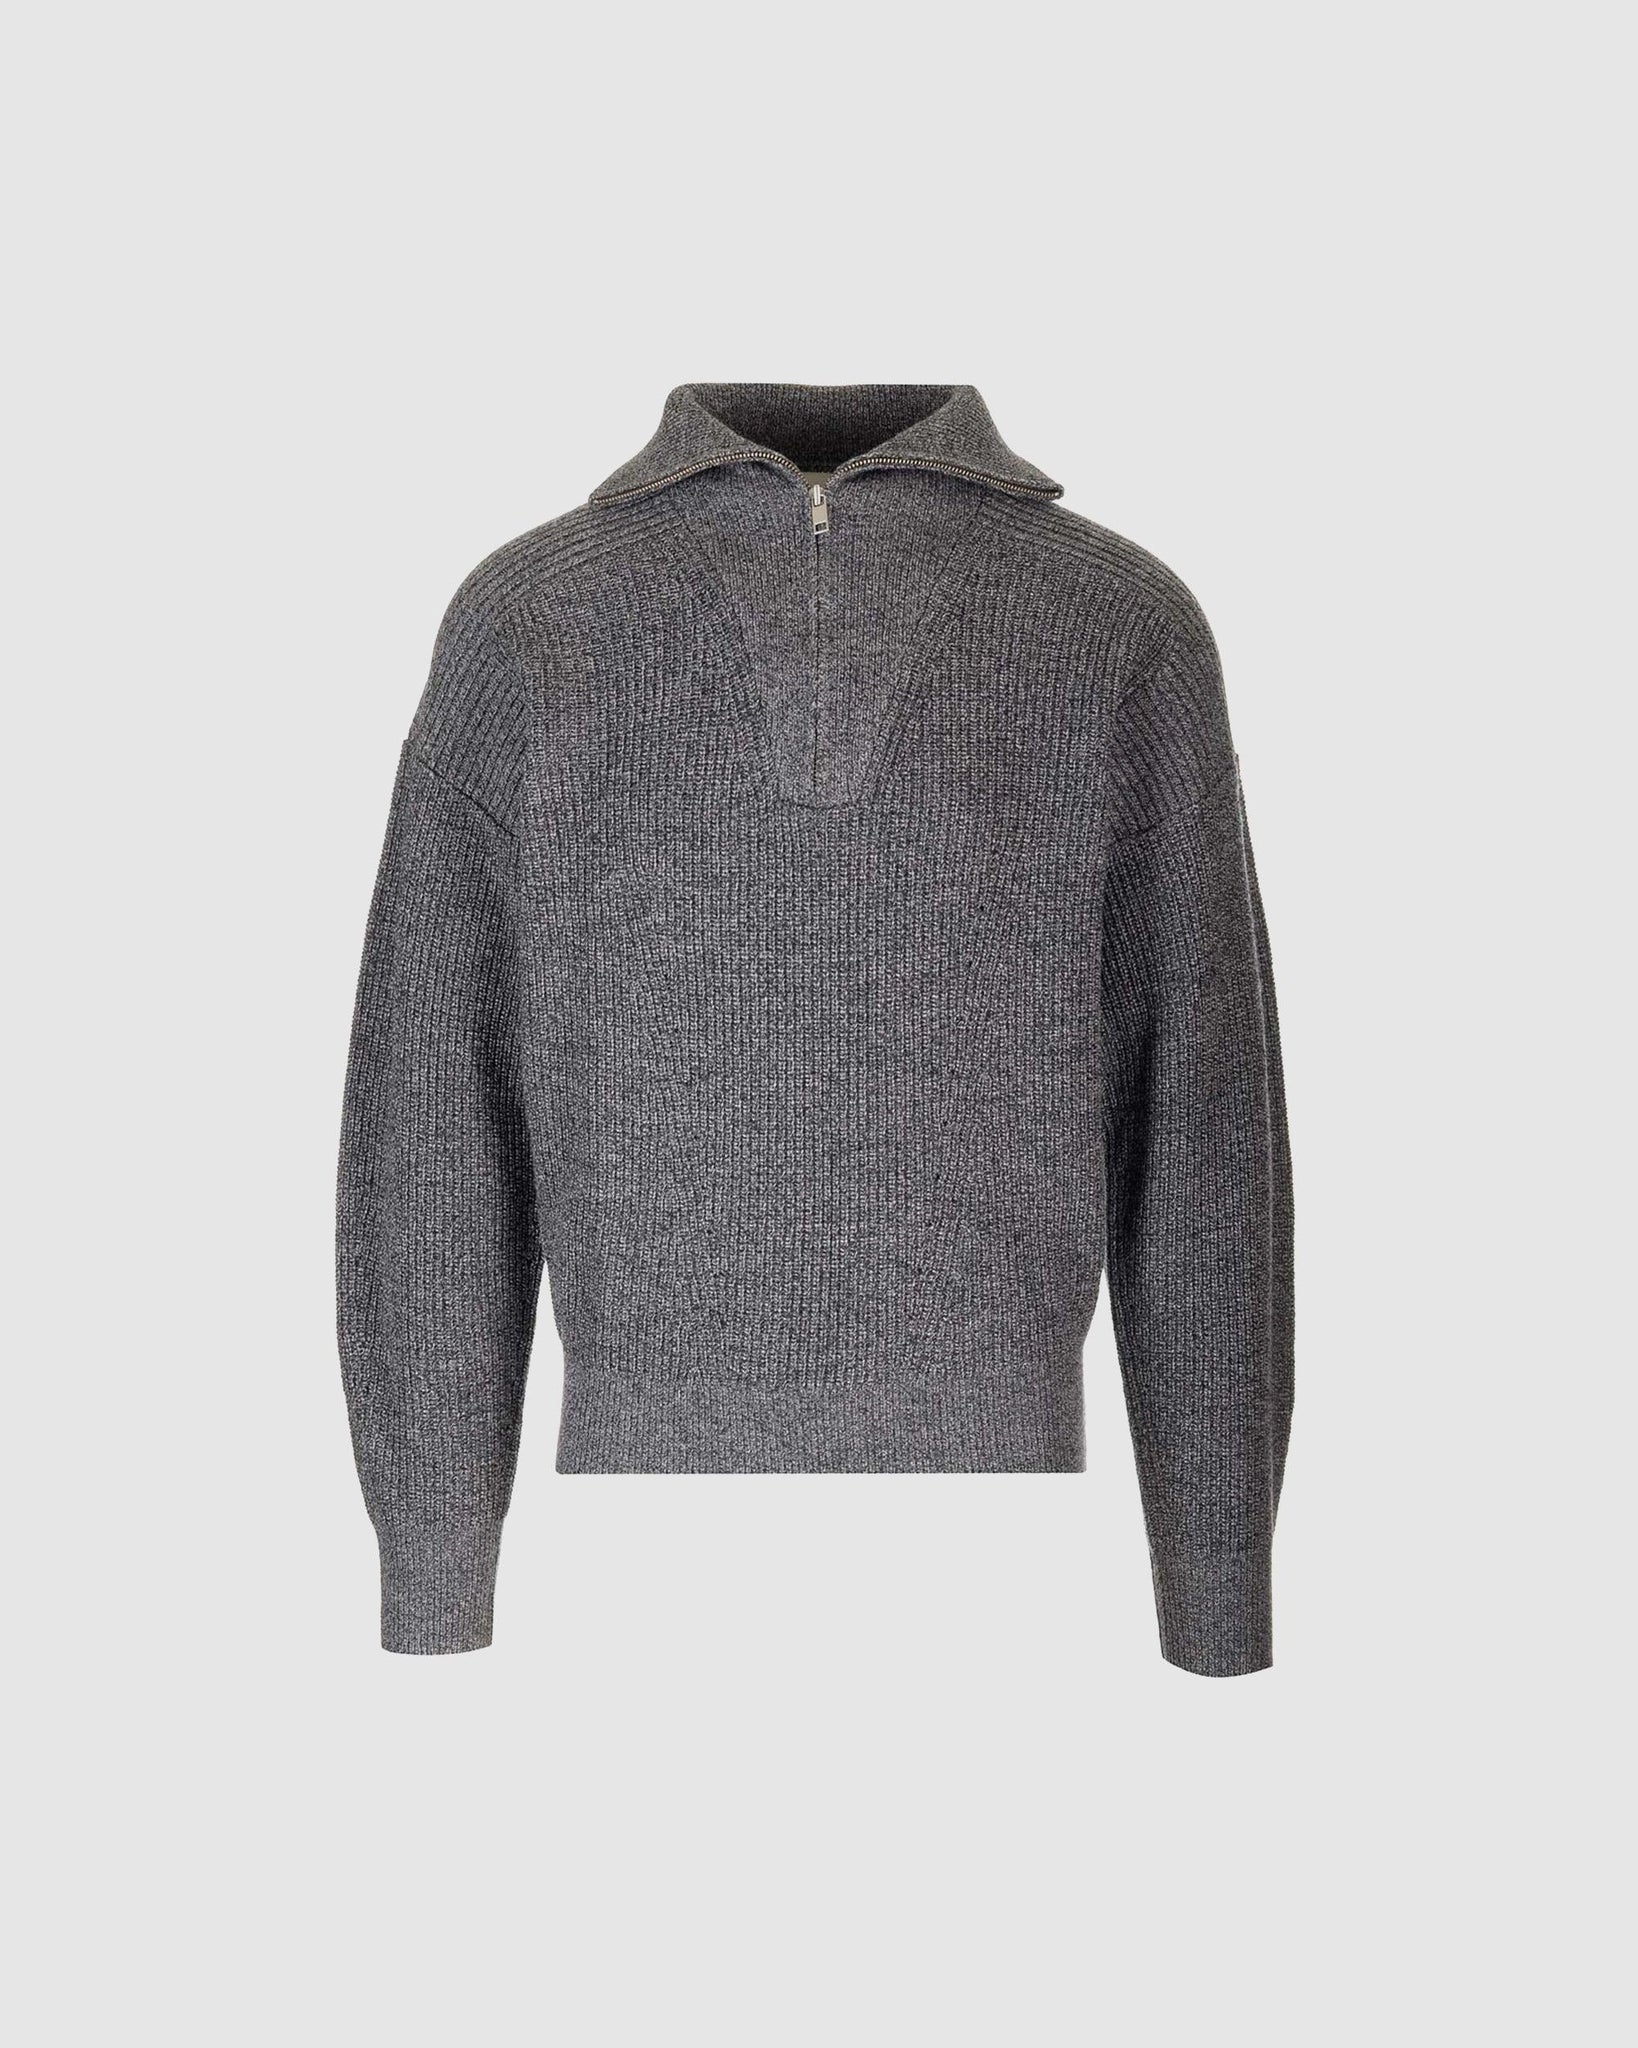 Benny Pullover - {{ collection.title }} - Chinatown Country Club 